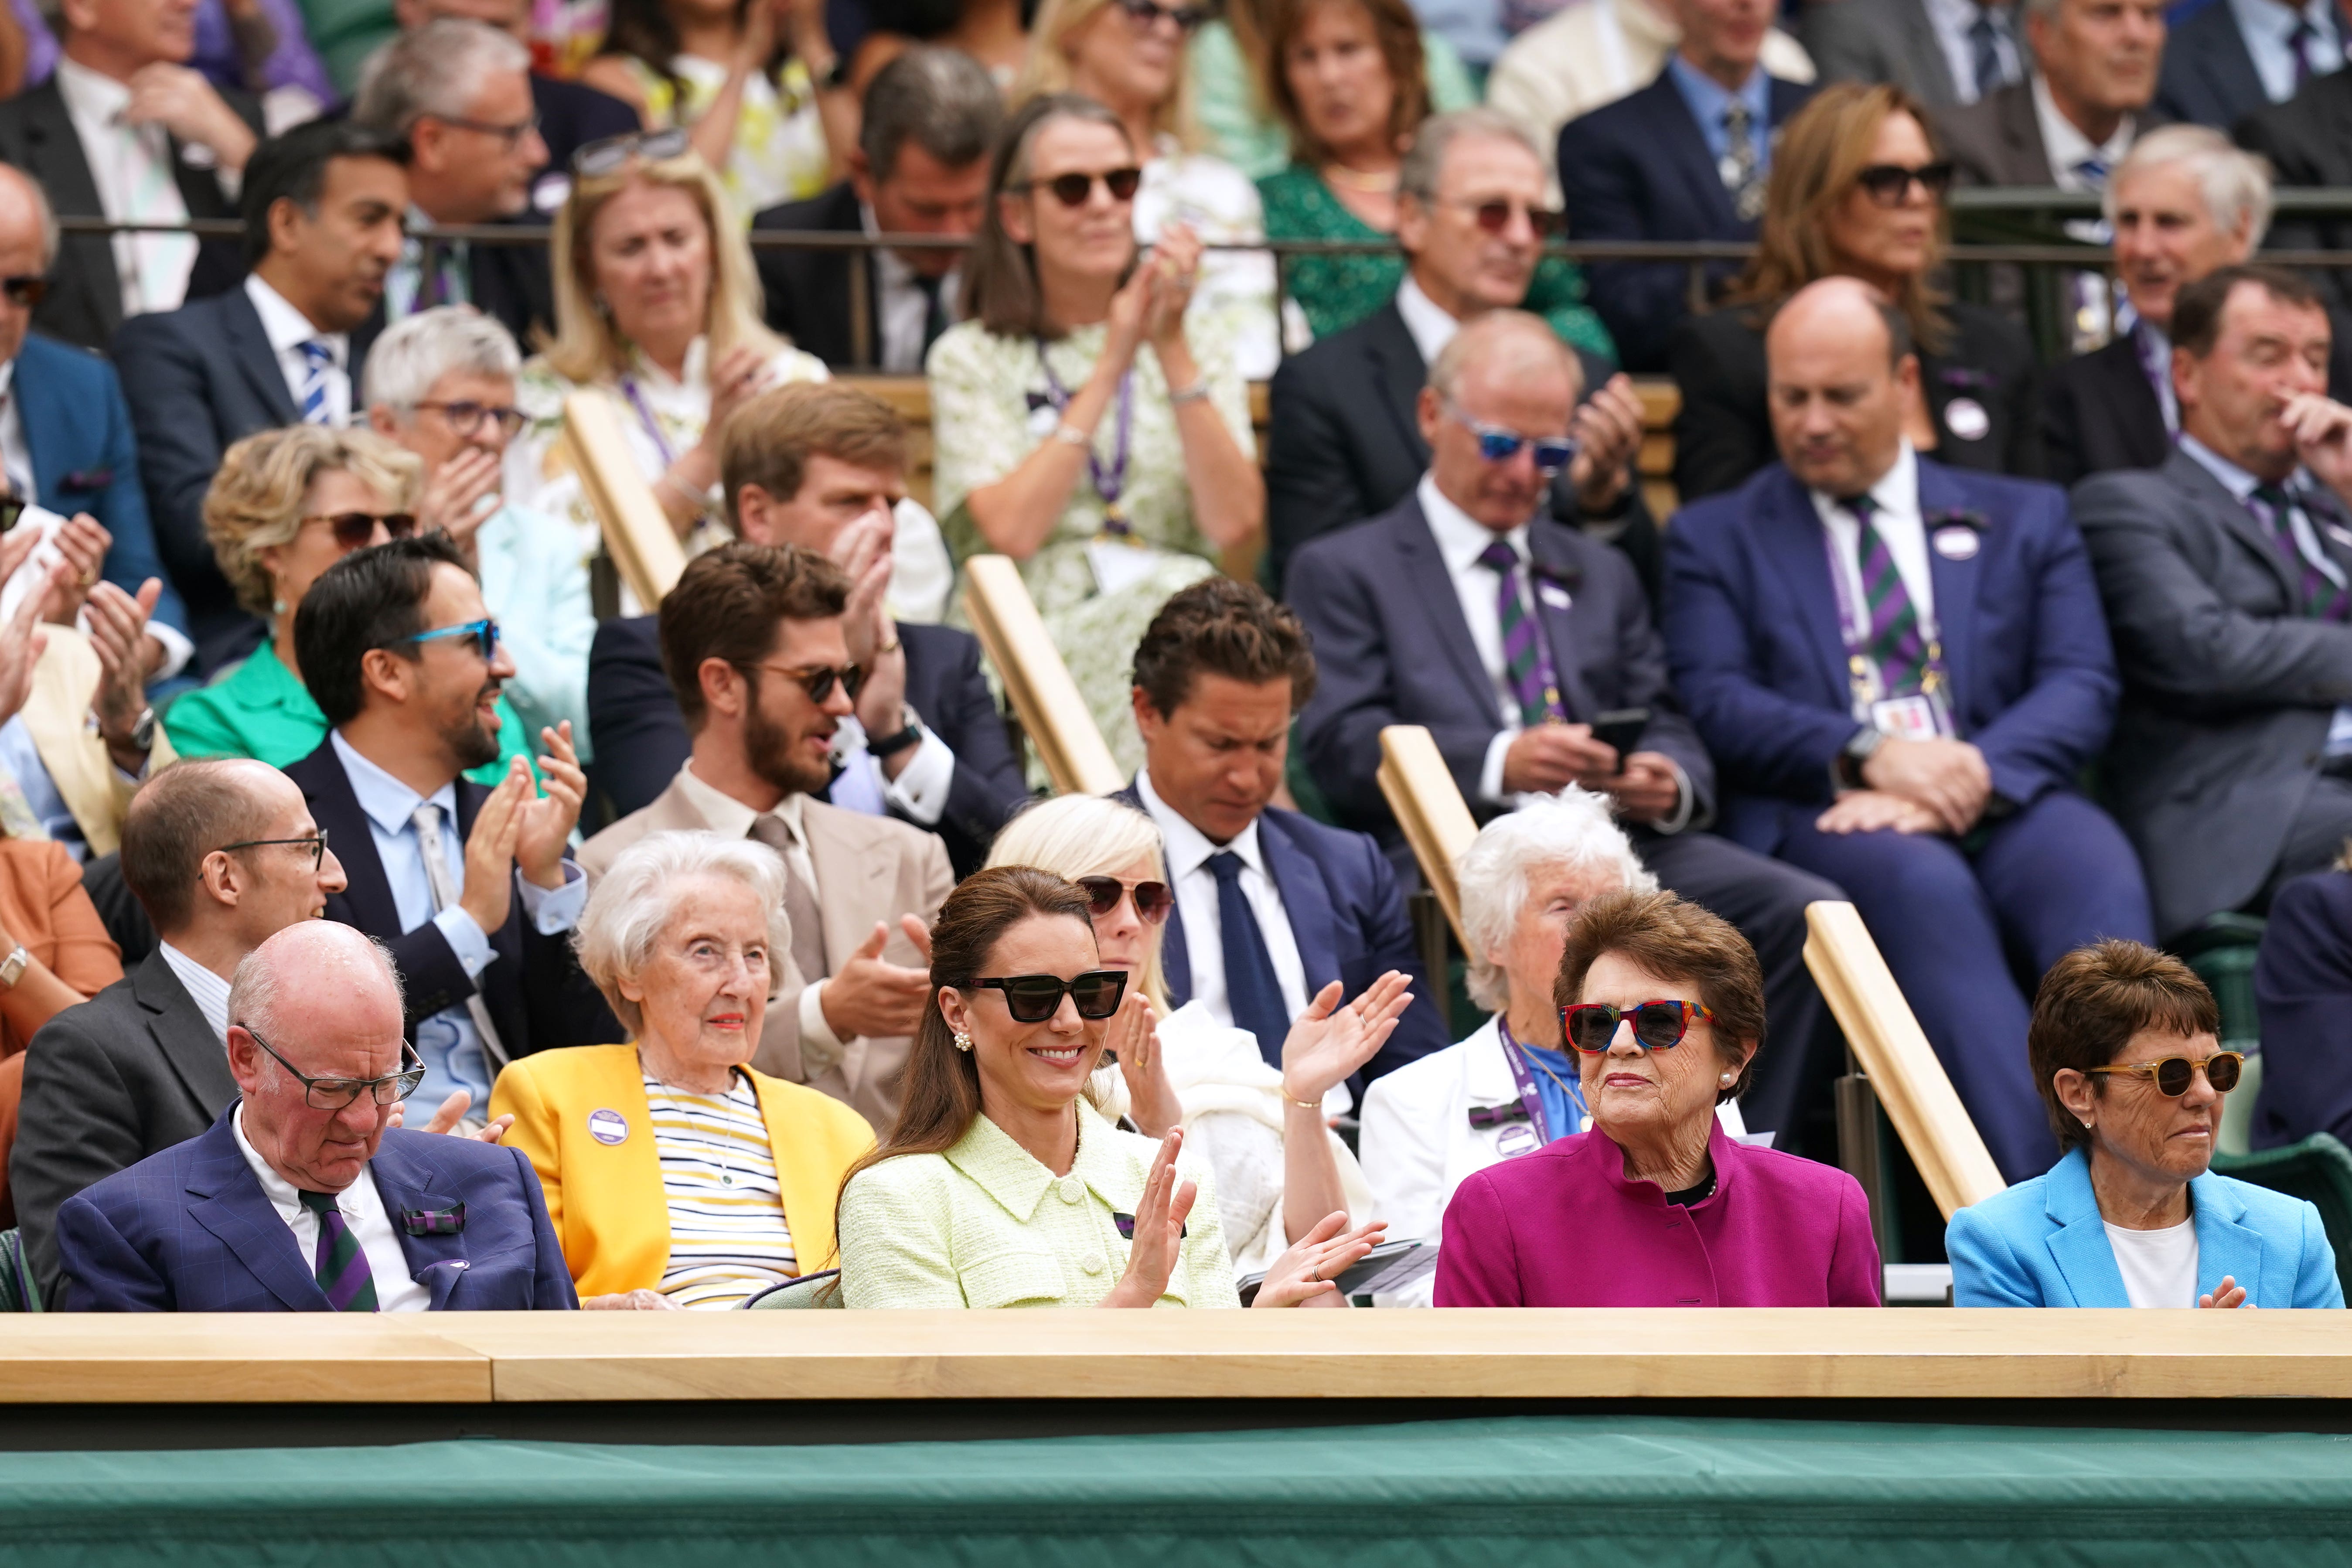 Kate watching Wimbledon ladies singles final from Royal Box The Independent